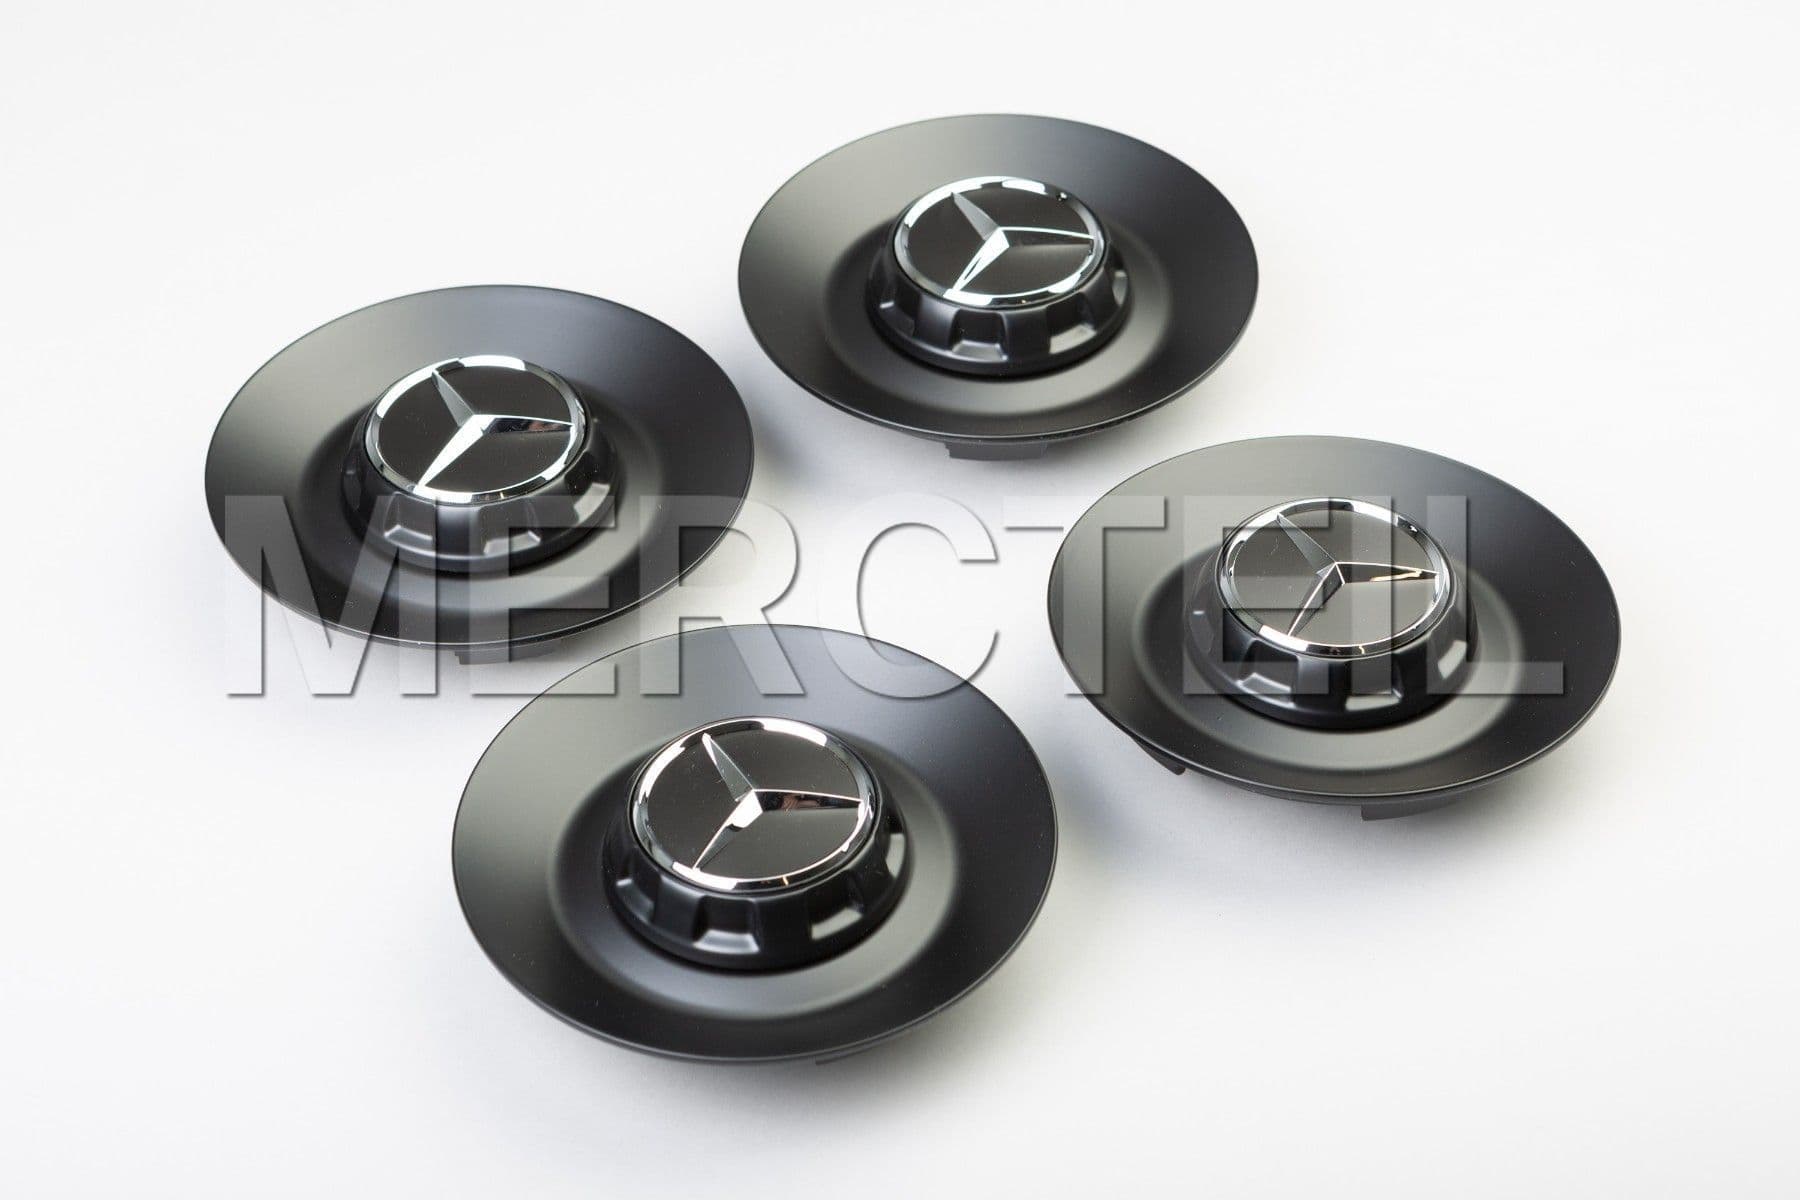 AMG Forged Wheels Hubcaps Kit Genuine Mercedes Benz (part number: A0004004300289283)